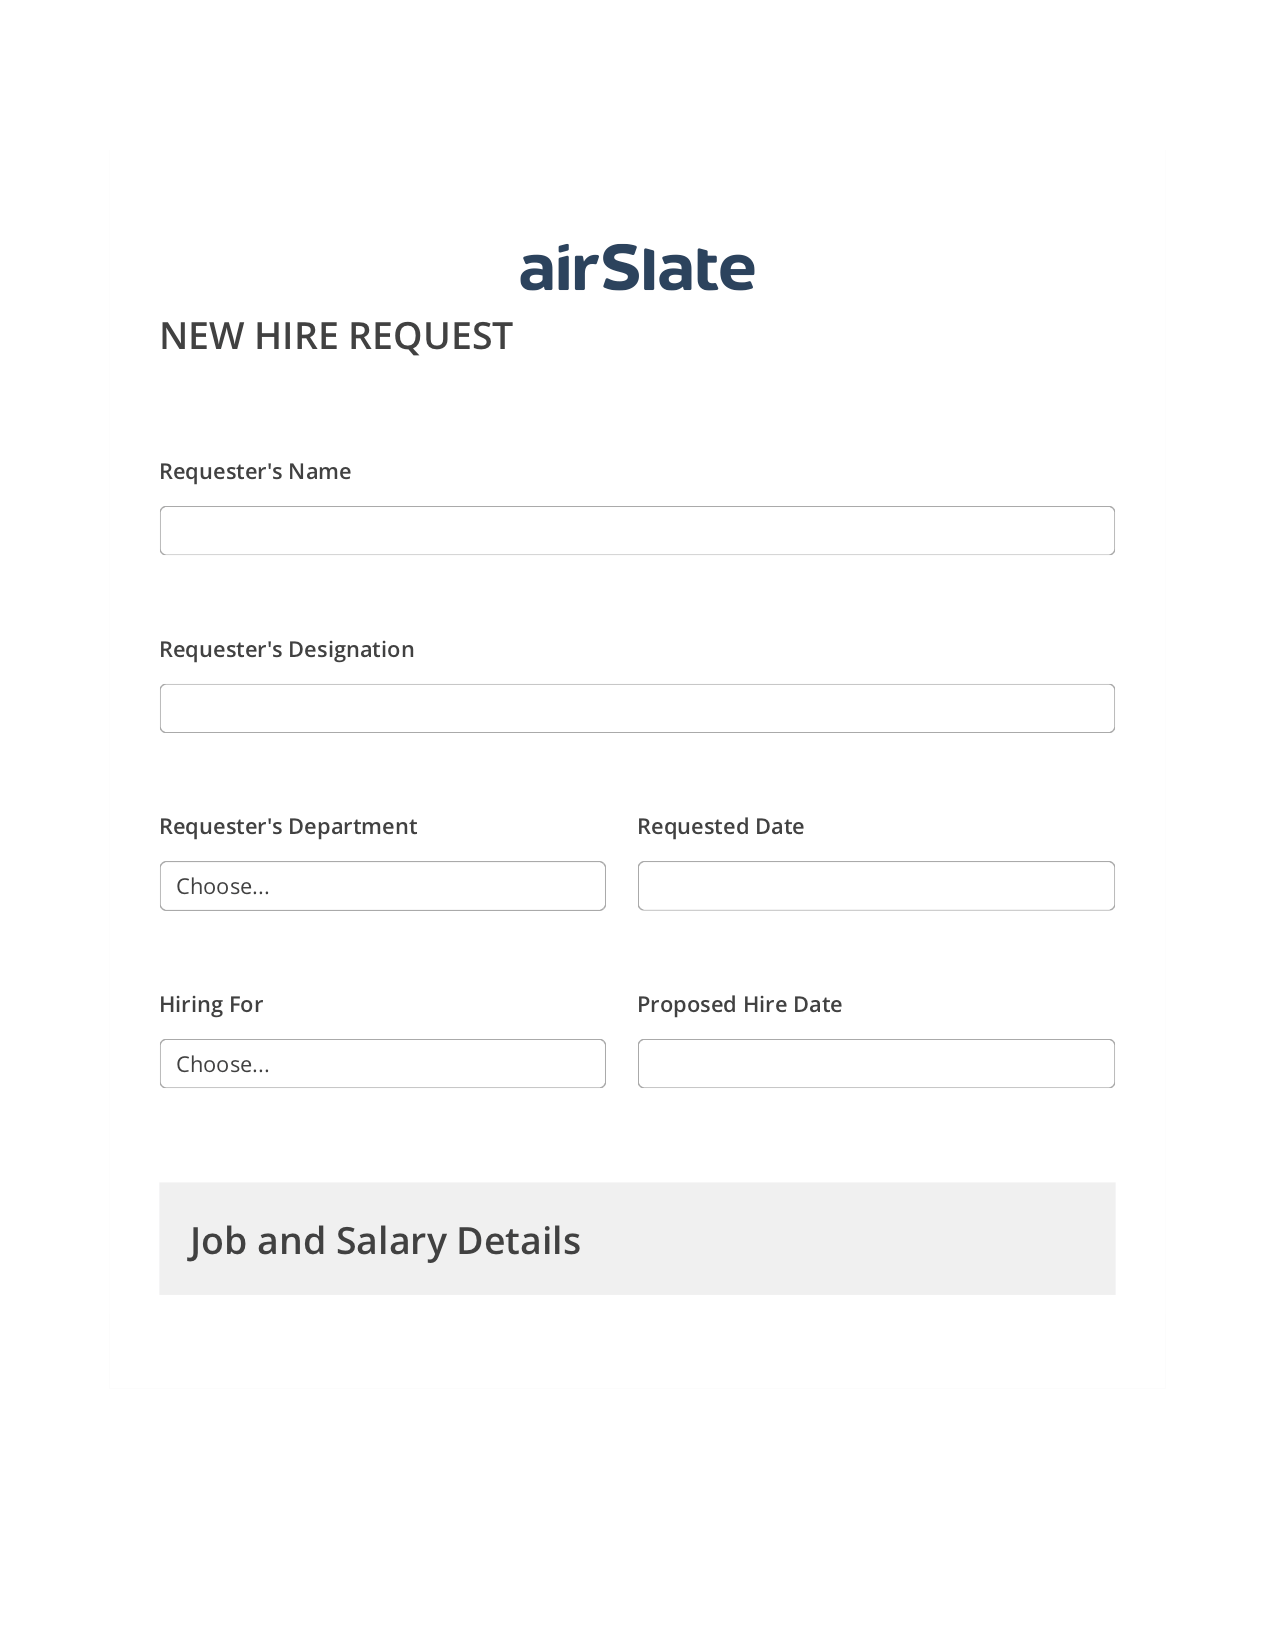 Hiring Request Workflow Pre-fill Document Bot, Revoke Access Bot, Export to Excel 365 Bot